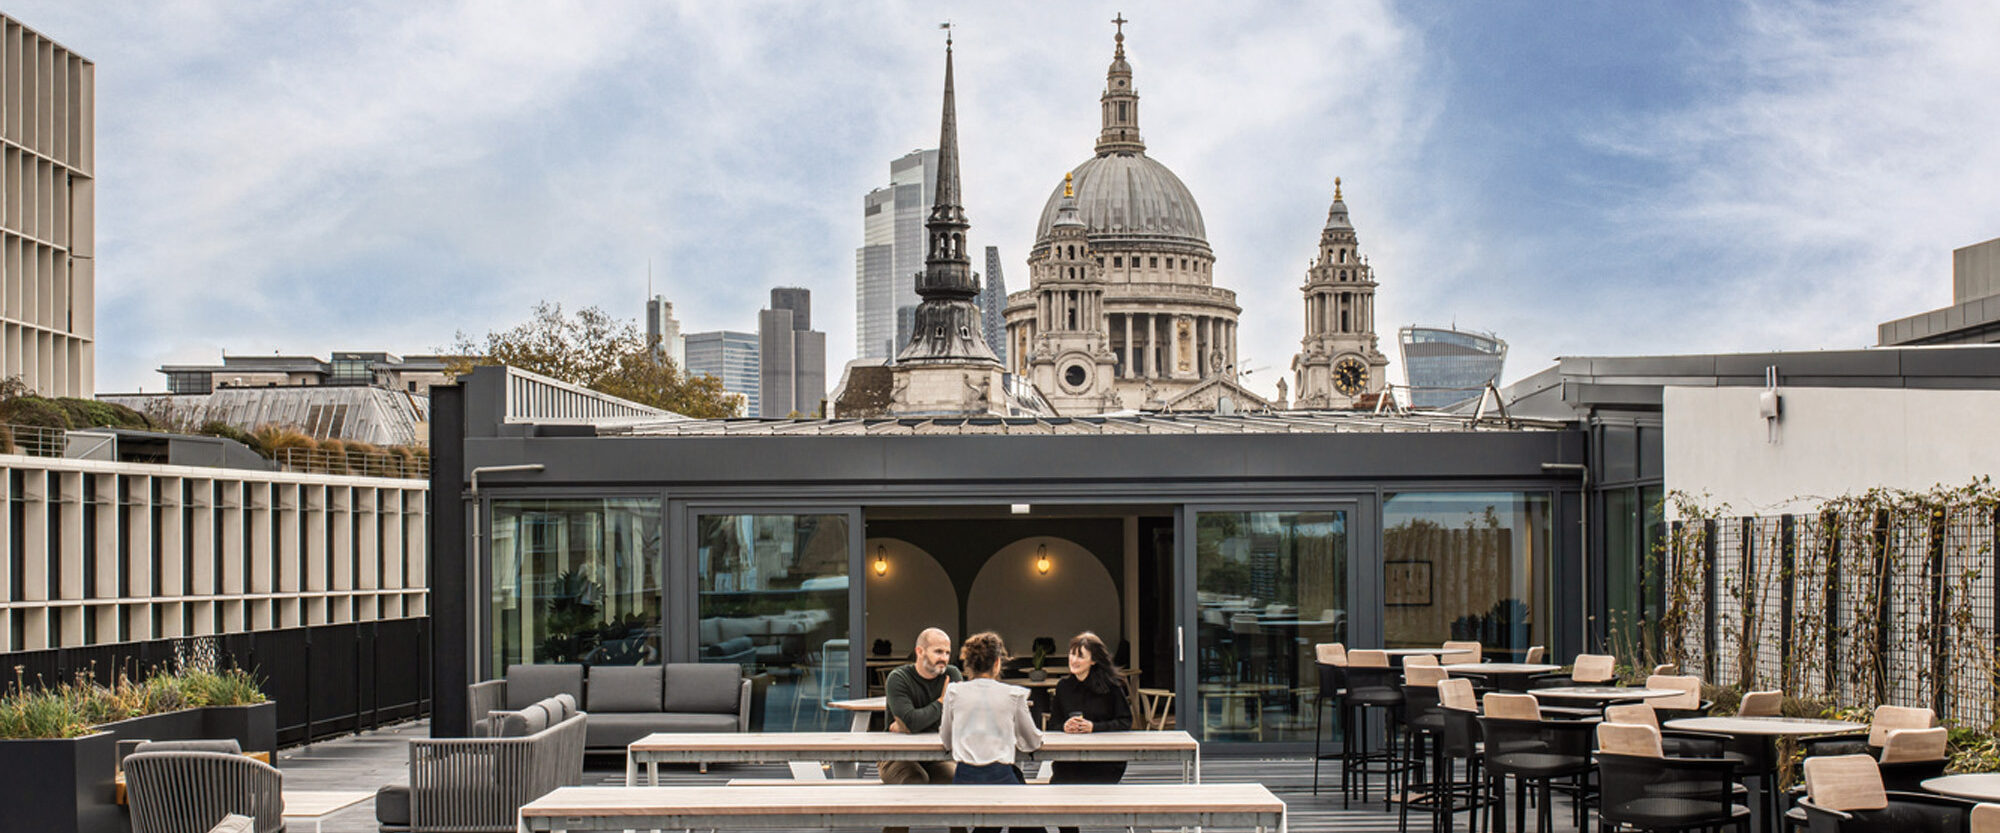 Rooftop terrace with contemporary outdoor furniture, featuring circular dining tables and woven chairs. Lush planters and elegant trellises frame the space, as the backdrop reveals a panoramic view of a city skyline, highlighting the grandeur of St. Paul's Cathedral under a clear sky.